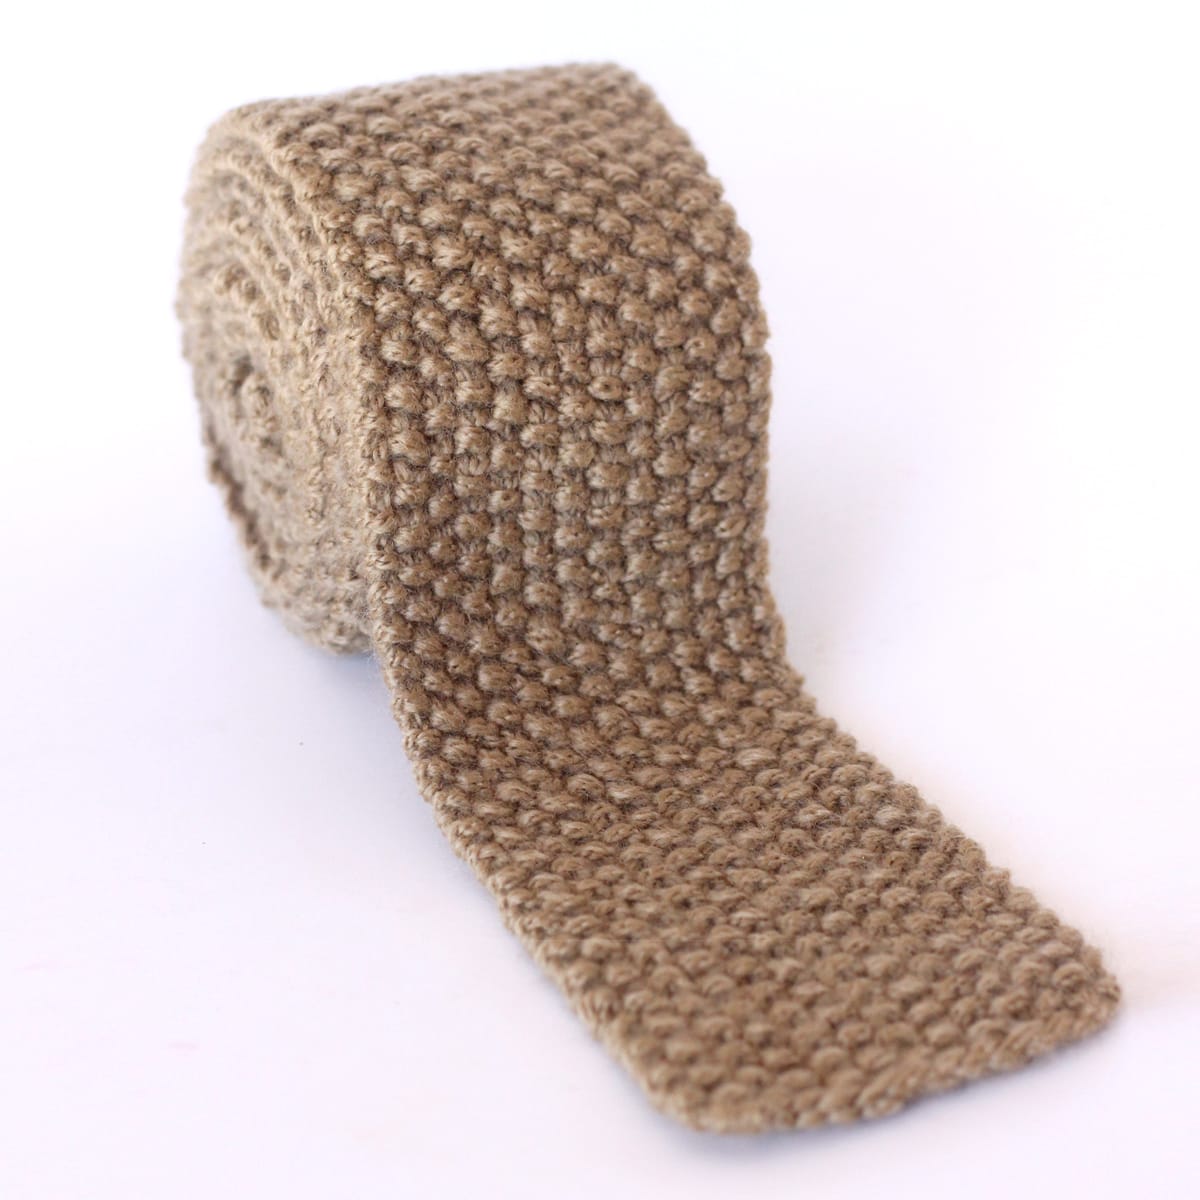 Seed Stitch Necktie knitted in tan color yarn rolled up on white background.